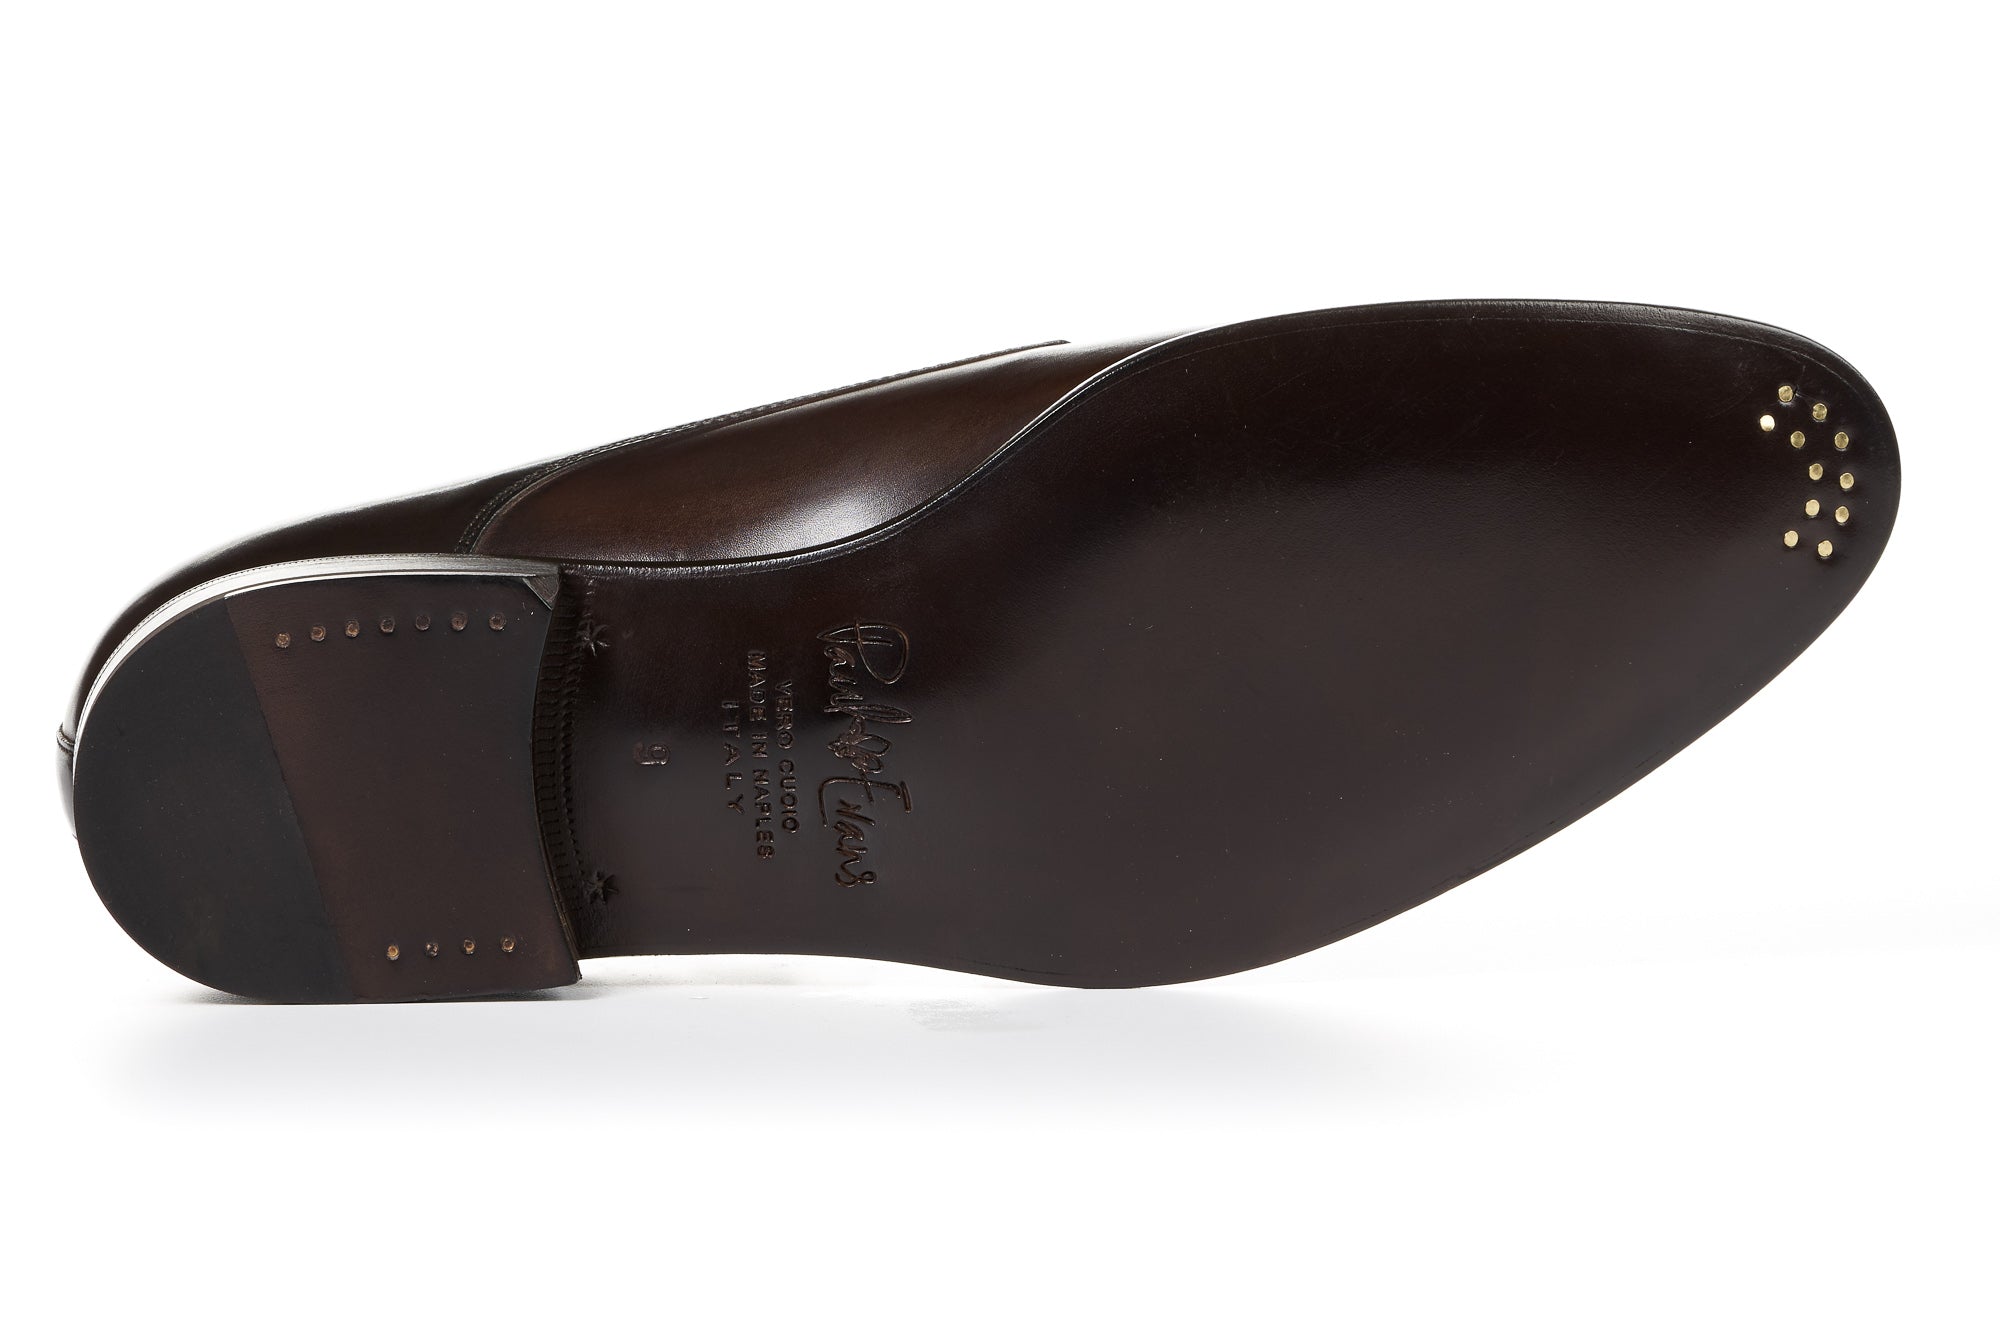 The Poitier Double Monk Strap - Chocolate